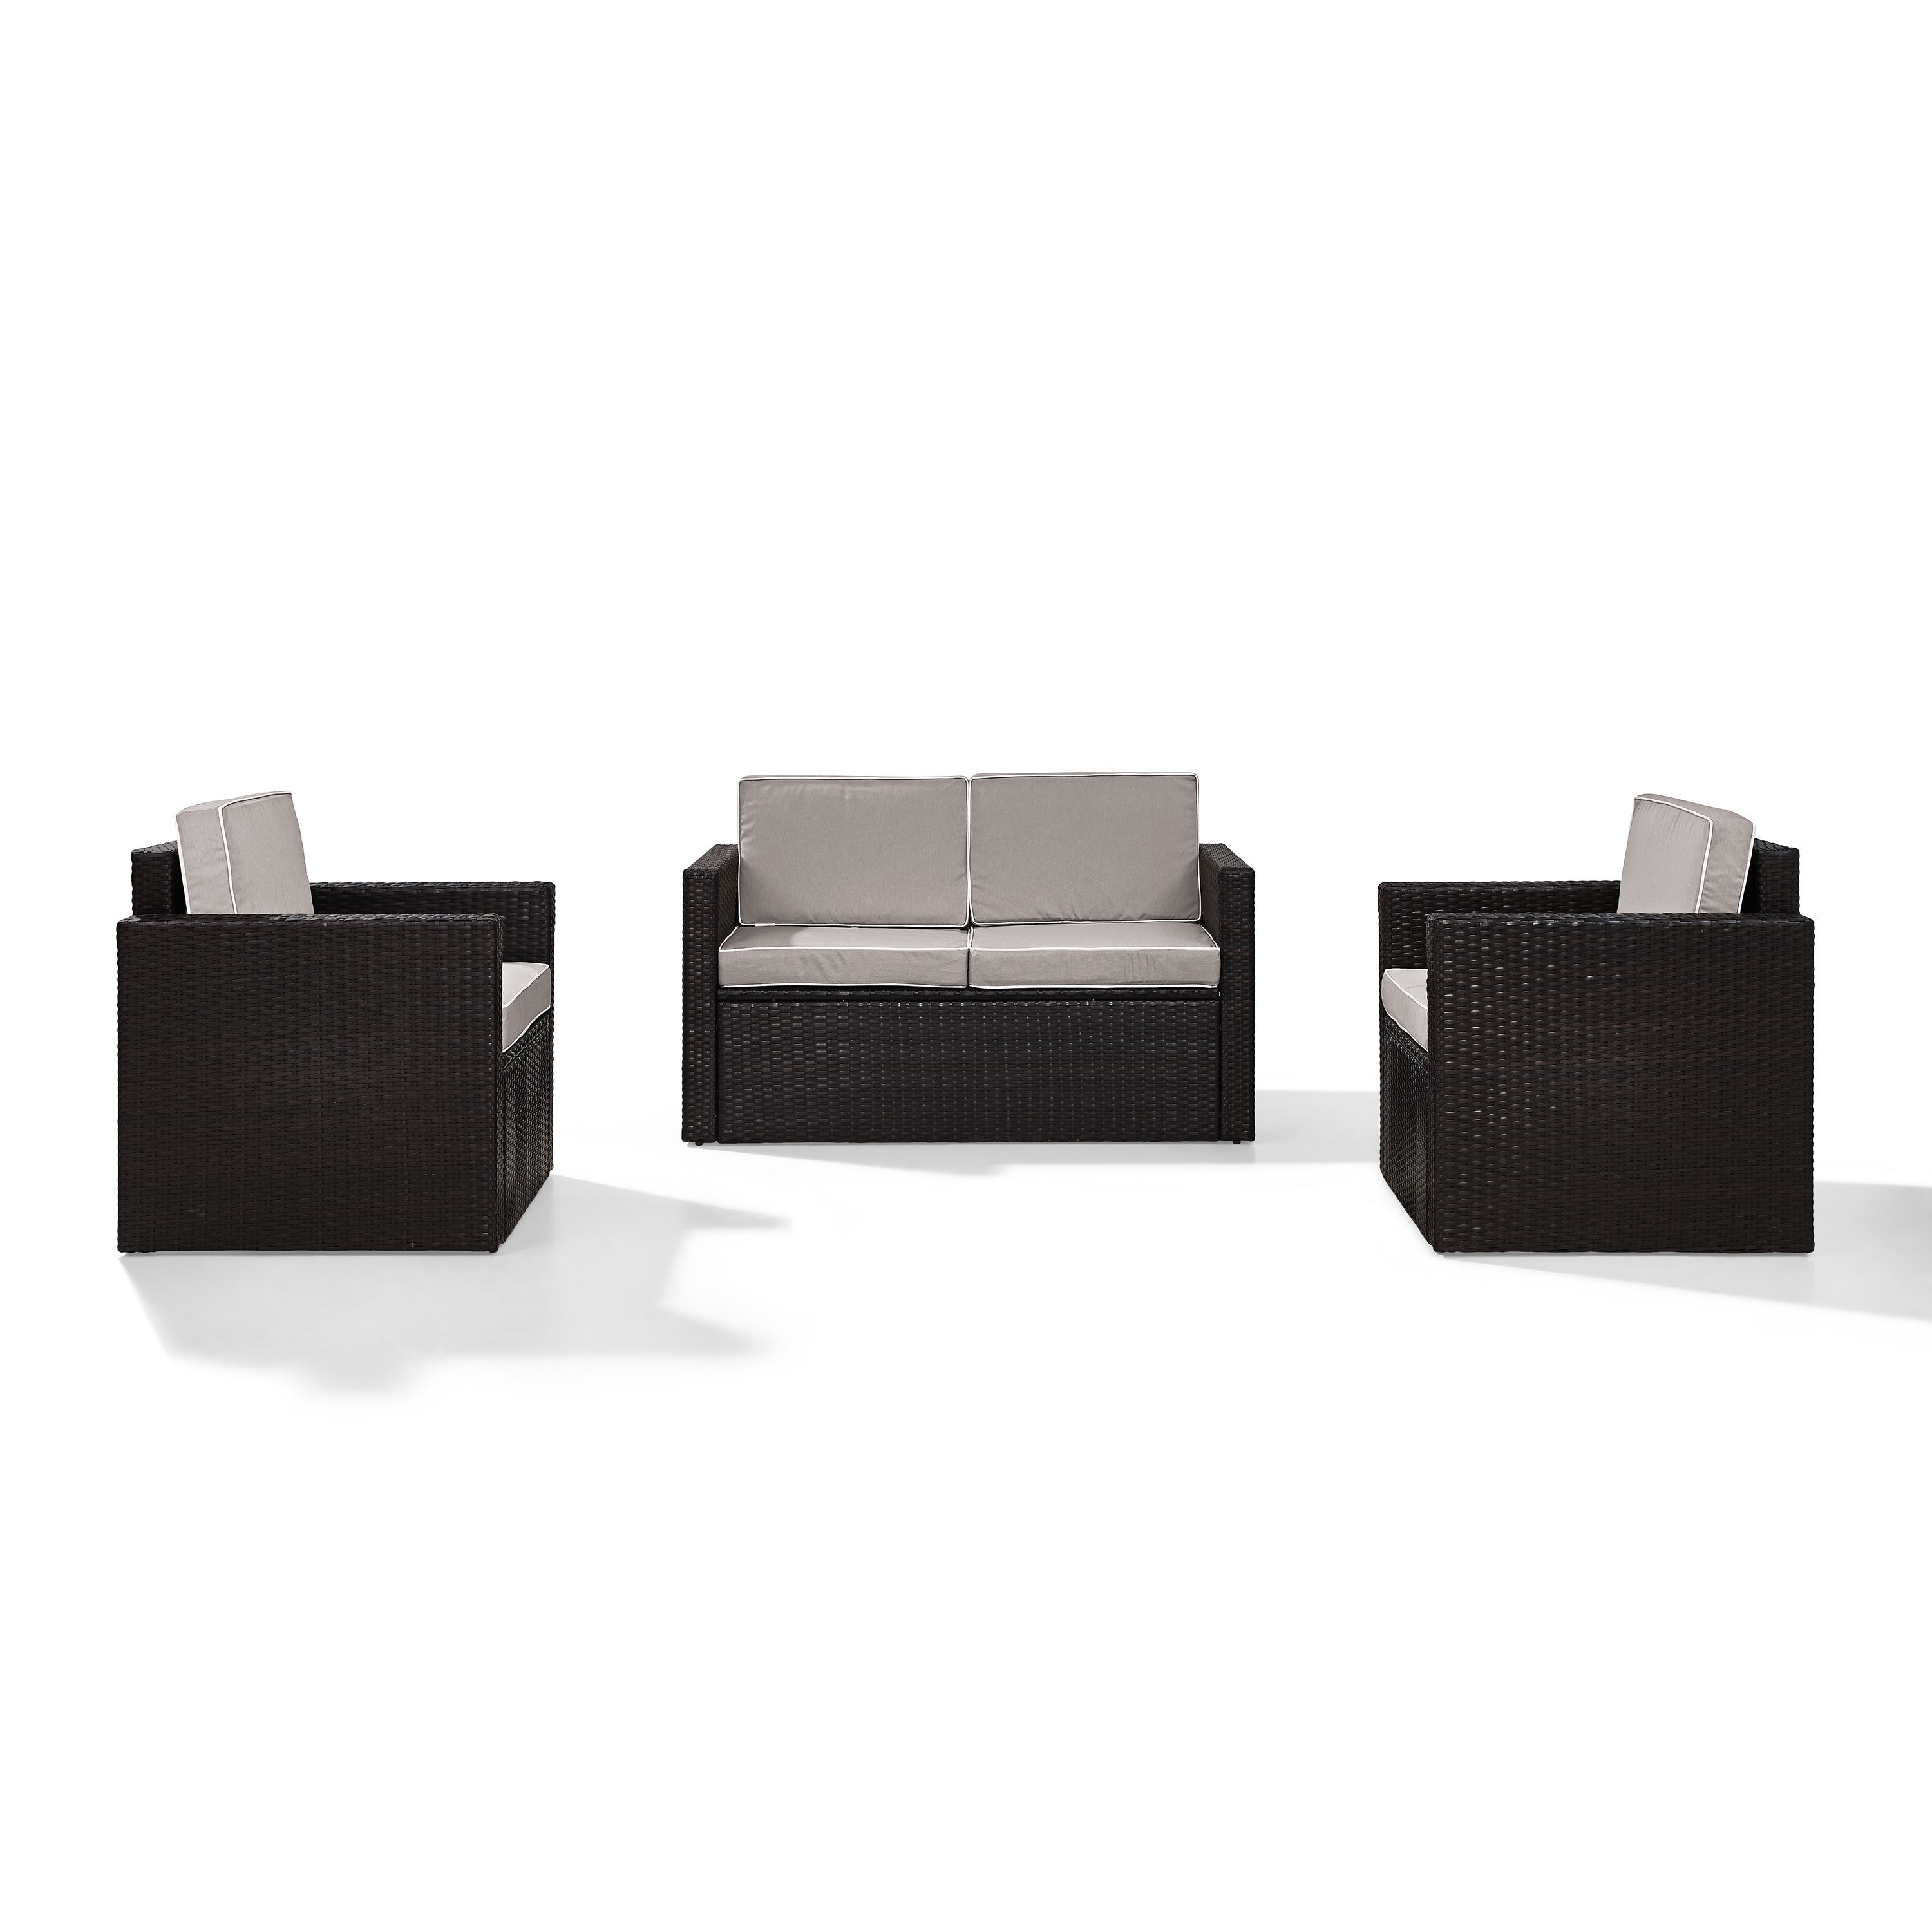 Crosley Palm Harbor 3 Piece Wicker Patio Sofa Set in Brown and Gray - image 2 of 5